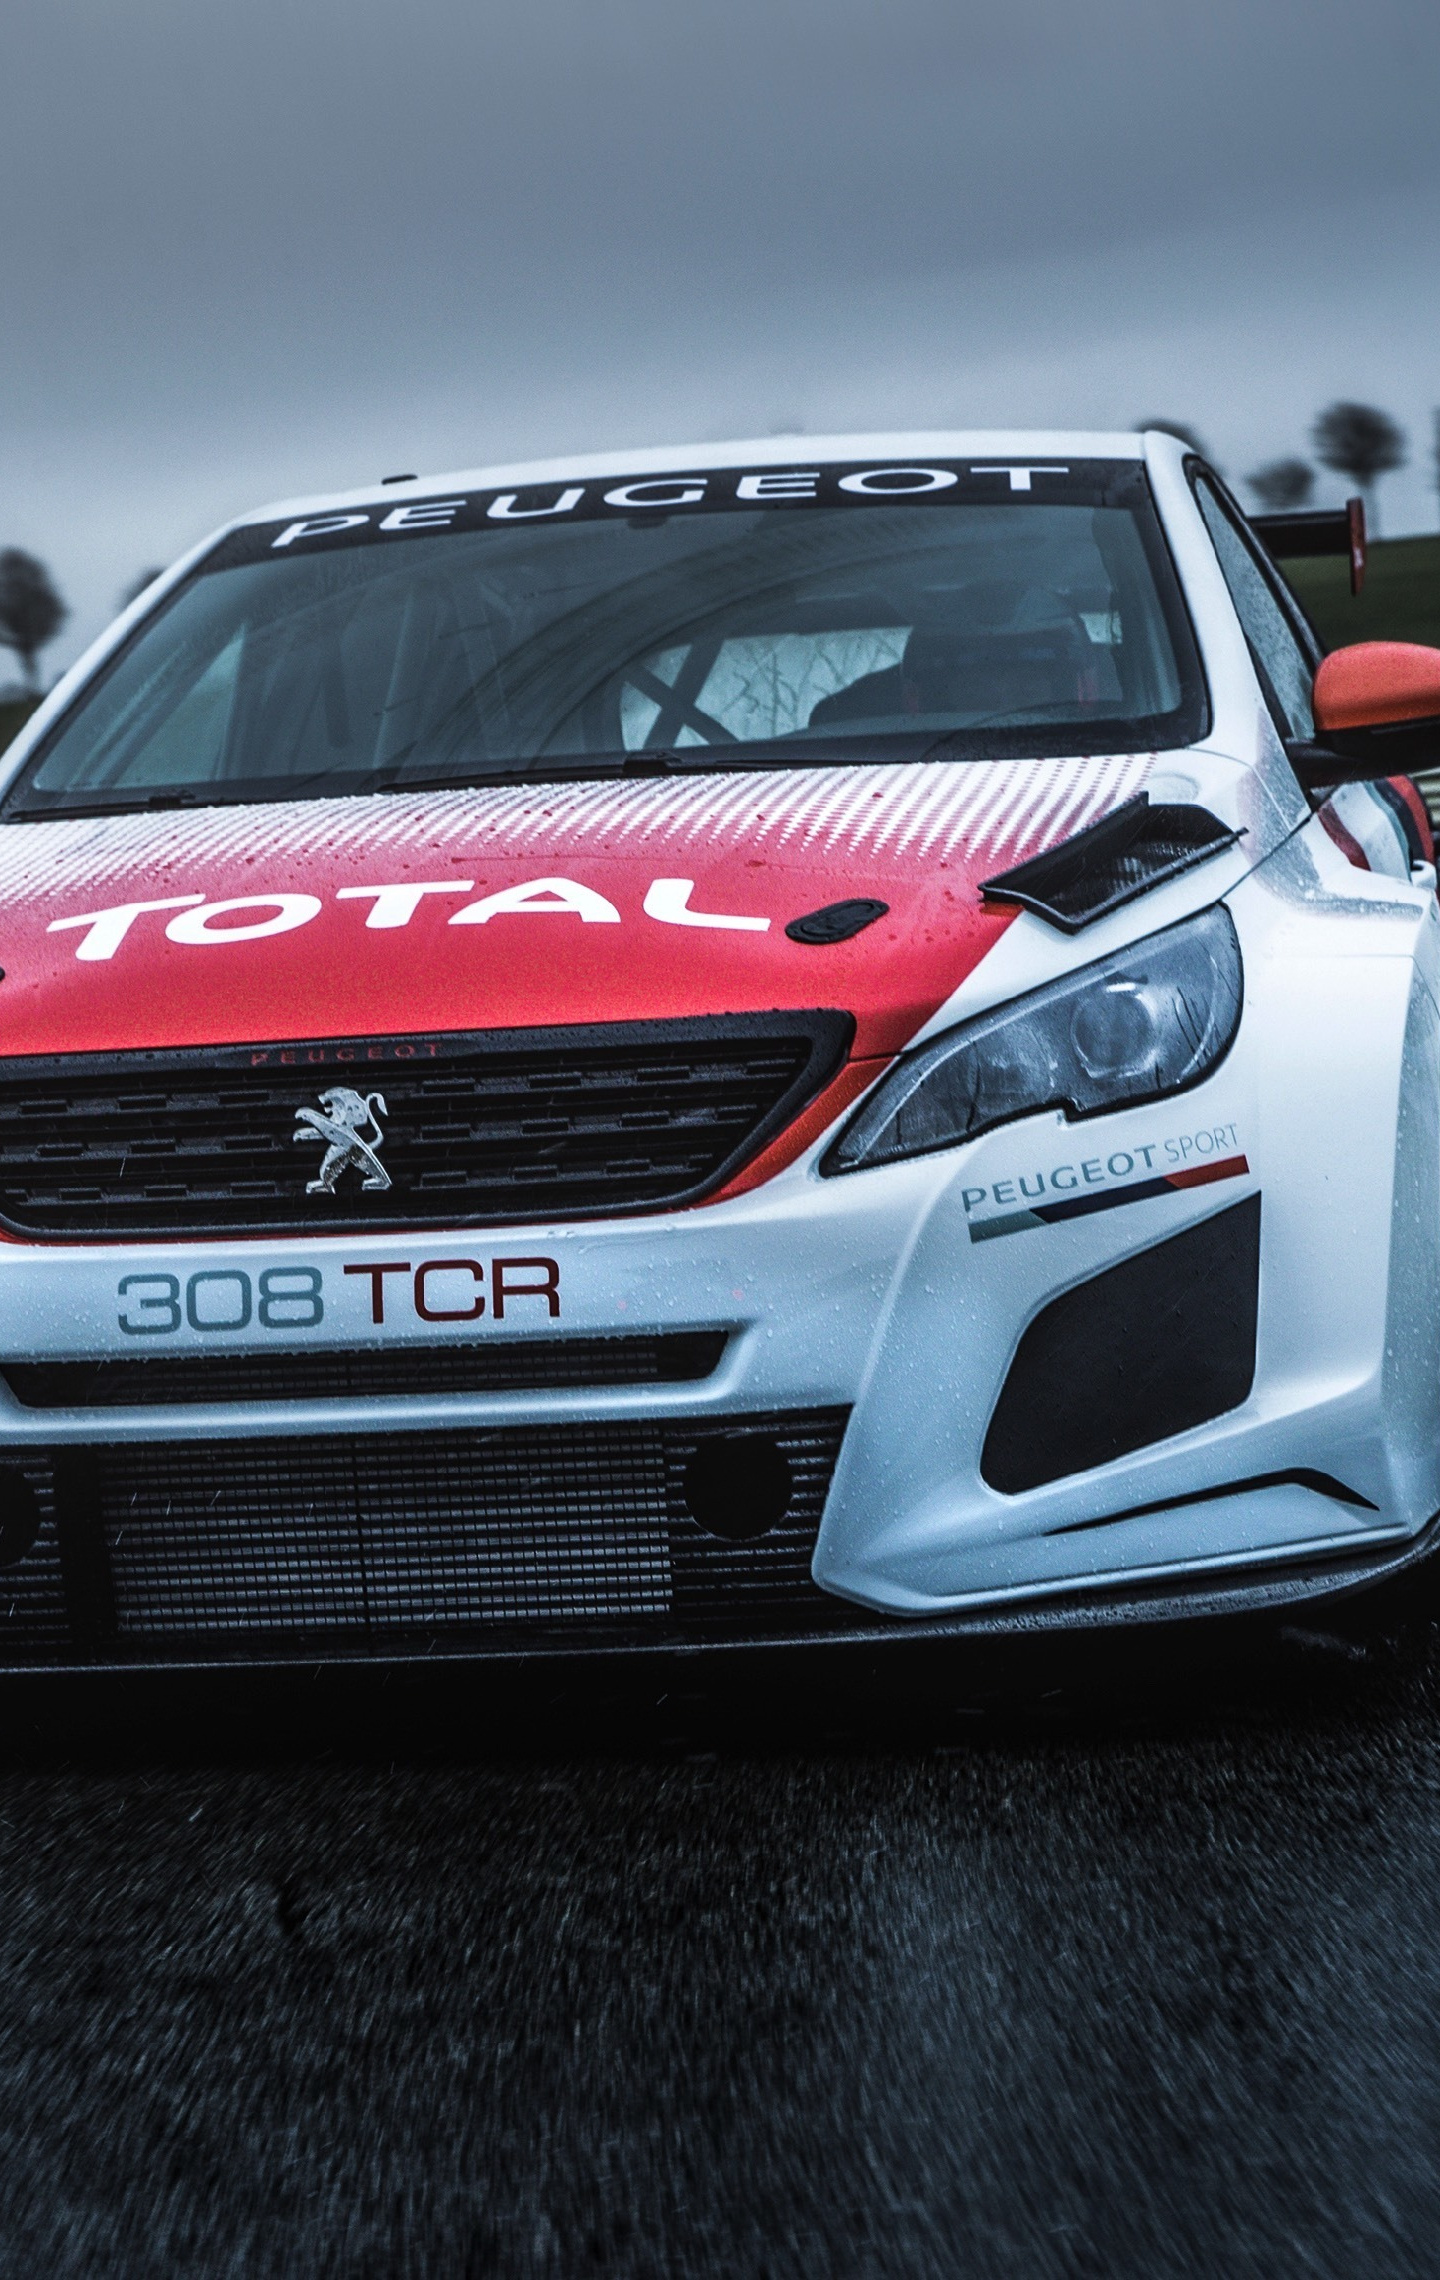 Peugeot 308 TCR, Front on road, Samsung Galaxy S8, HD image, 1440x2280 HD Phone